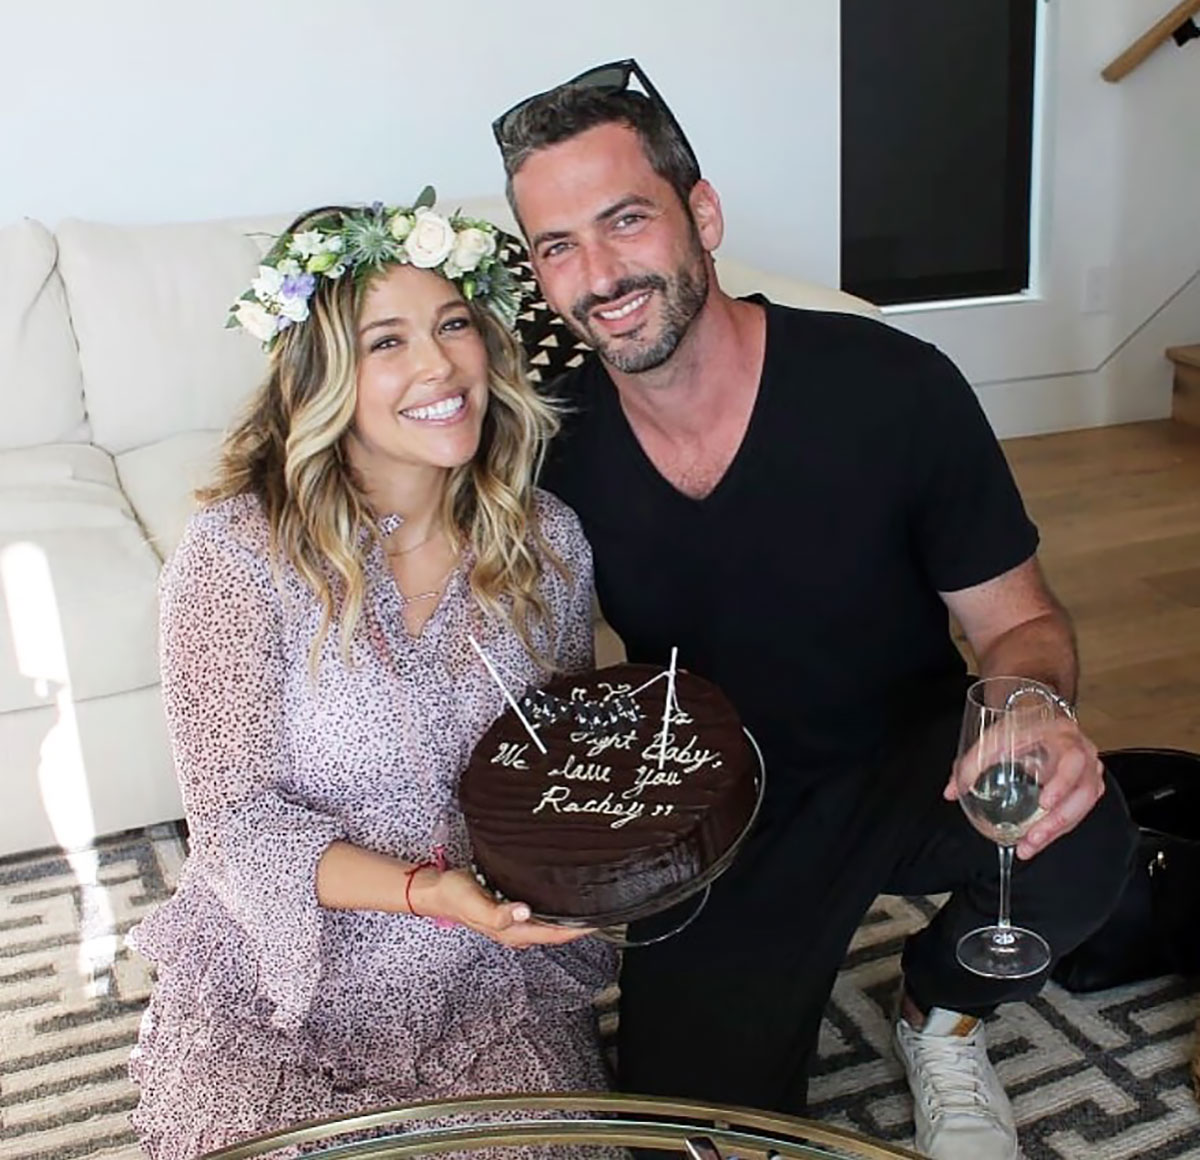 Singer Rachel Platten Gives Birth, Welcomes First Child With Kevin Lazan